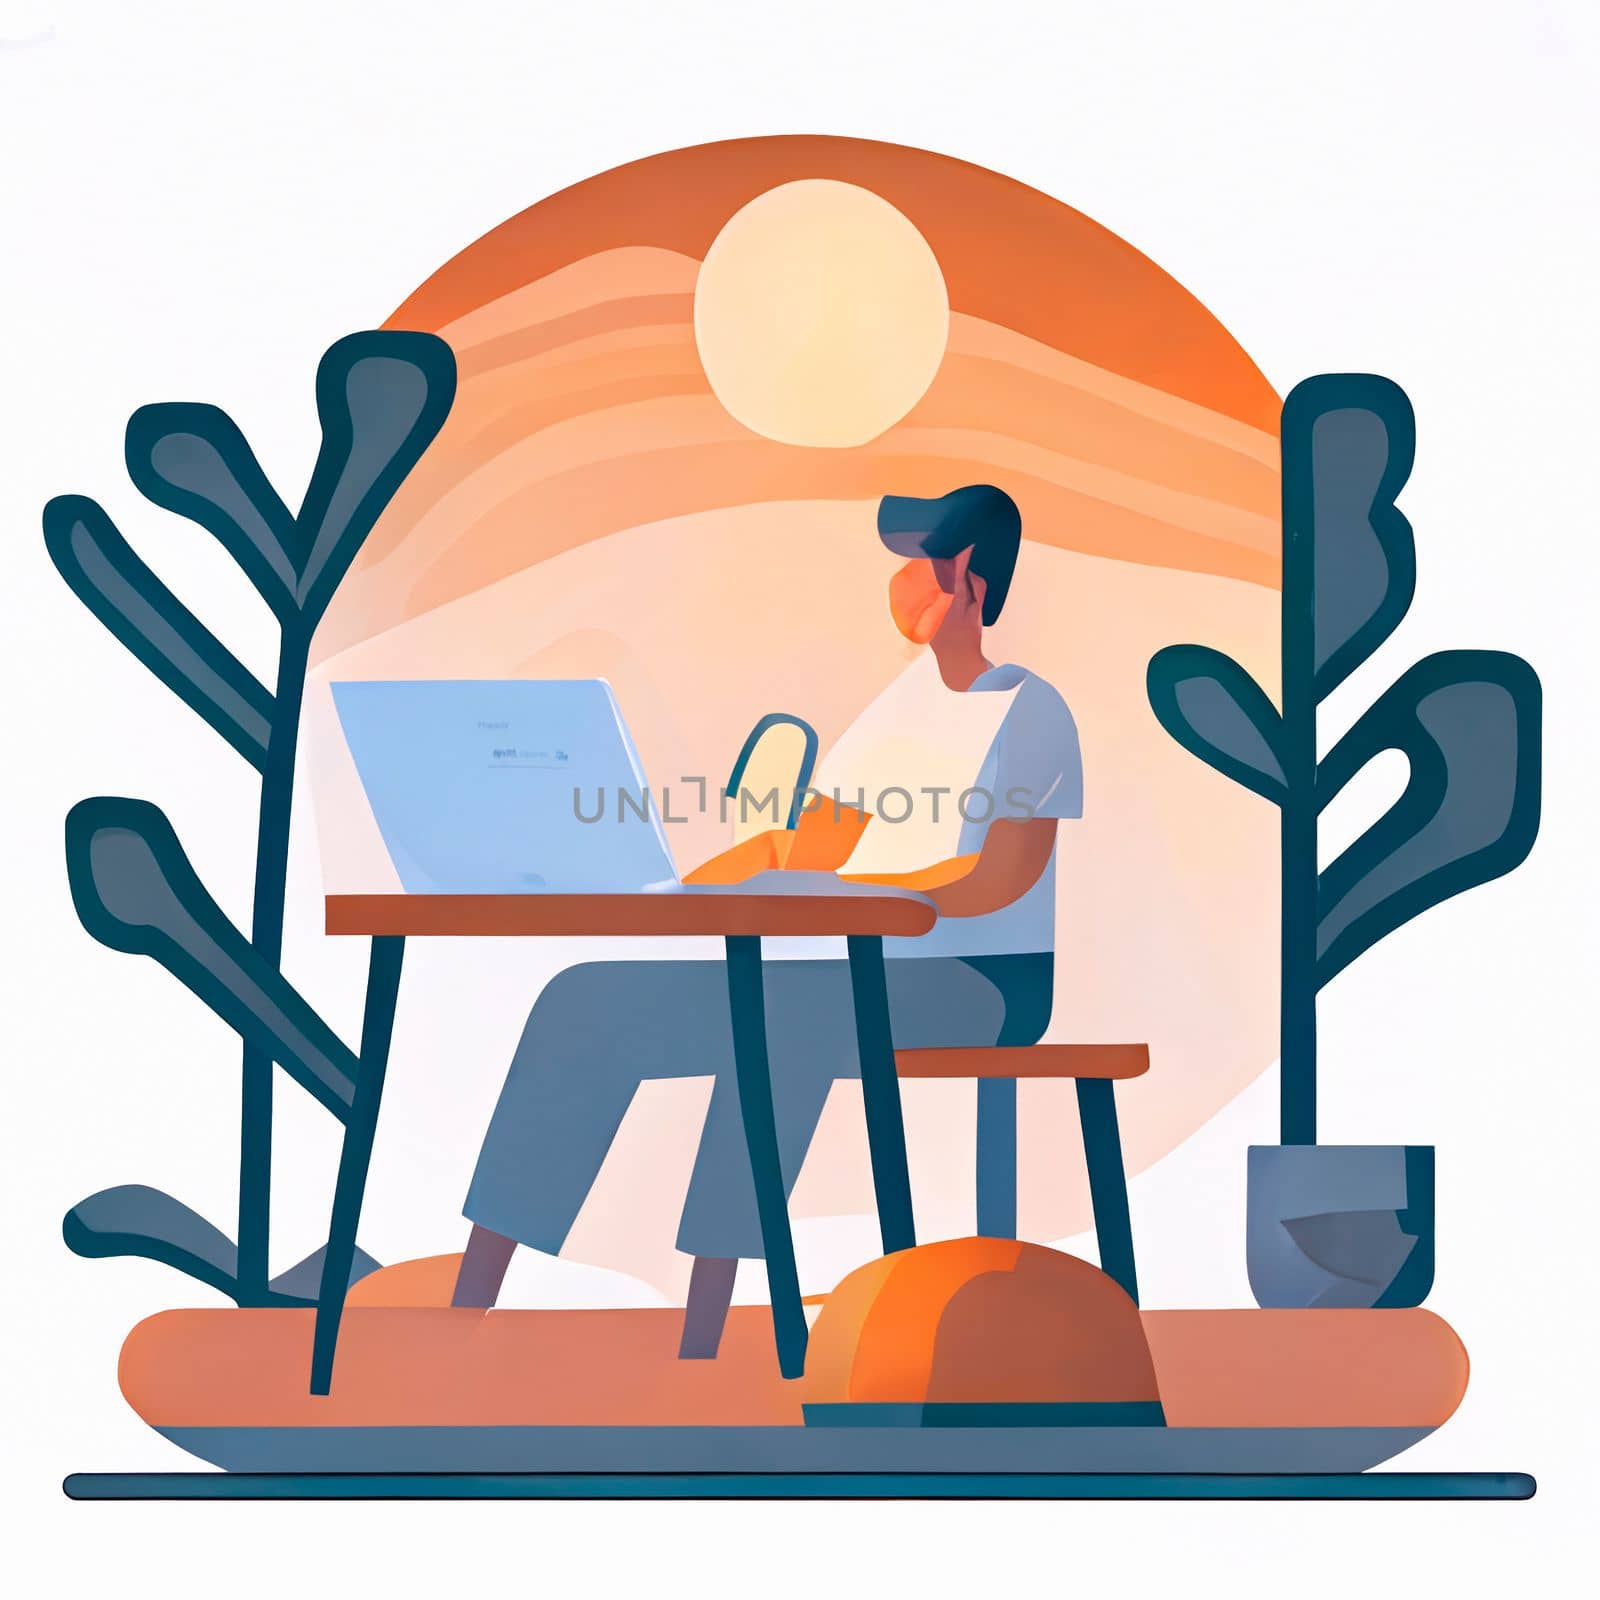 A simple illustration of a developer sitting at a laptop by NeuroSky